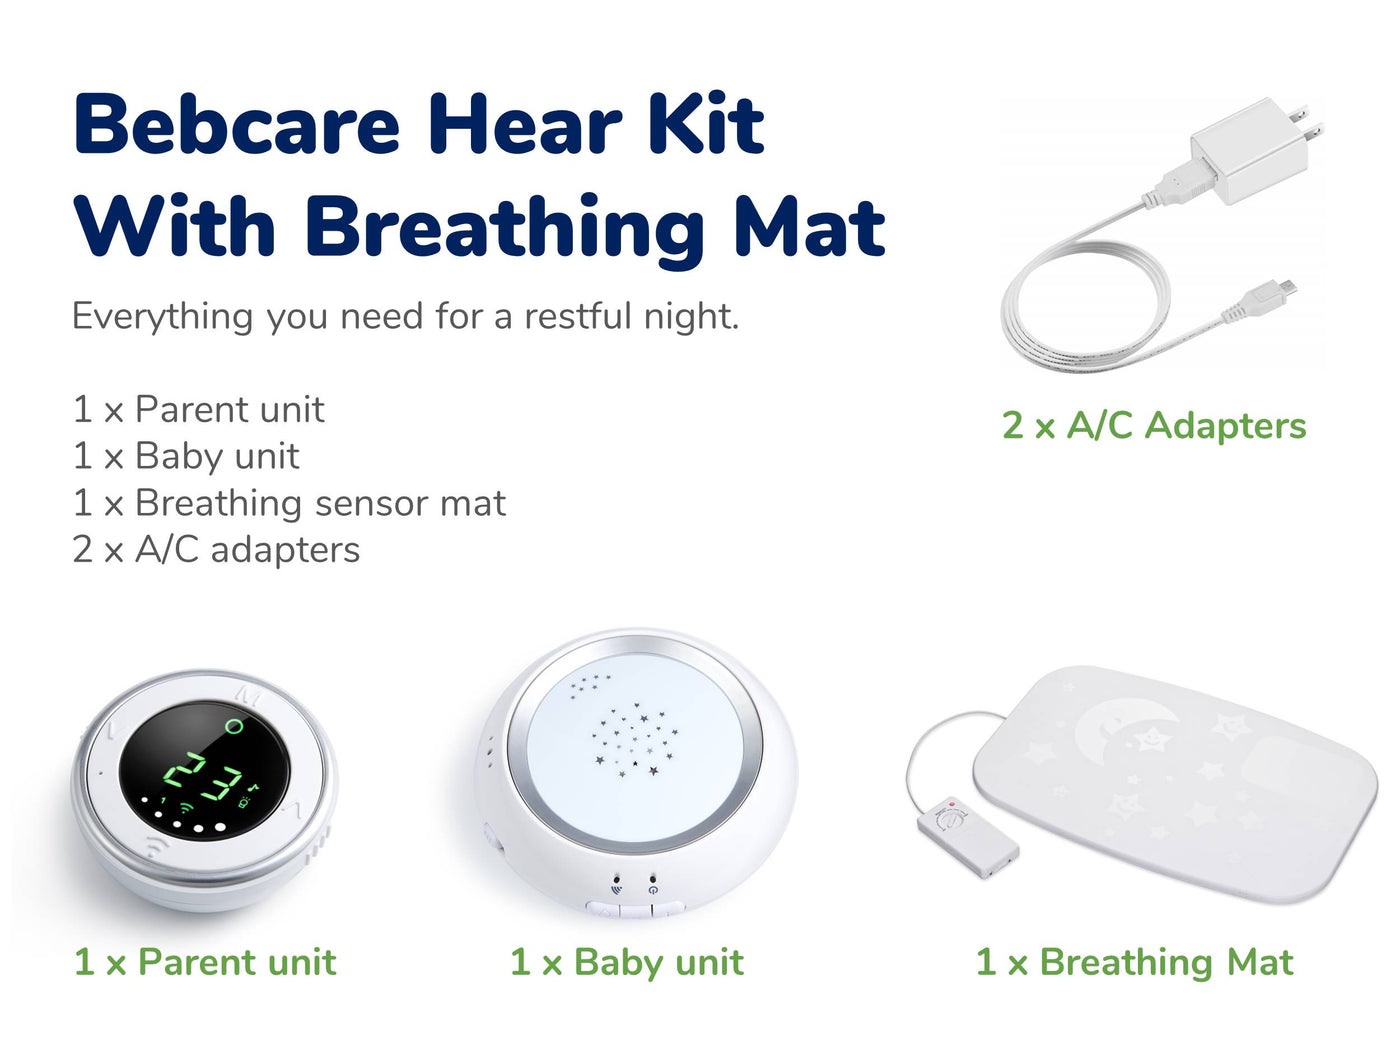 What's included - Bebcare Hear Kit with Bebcare Mat baby sensor mat